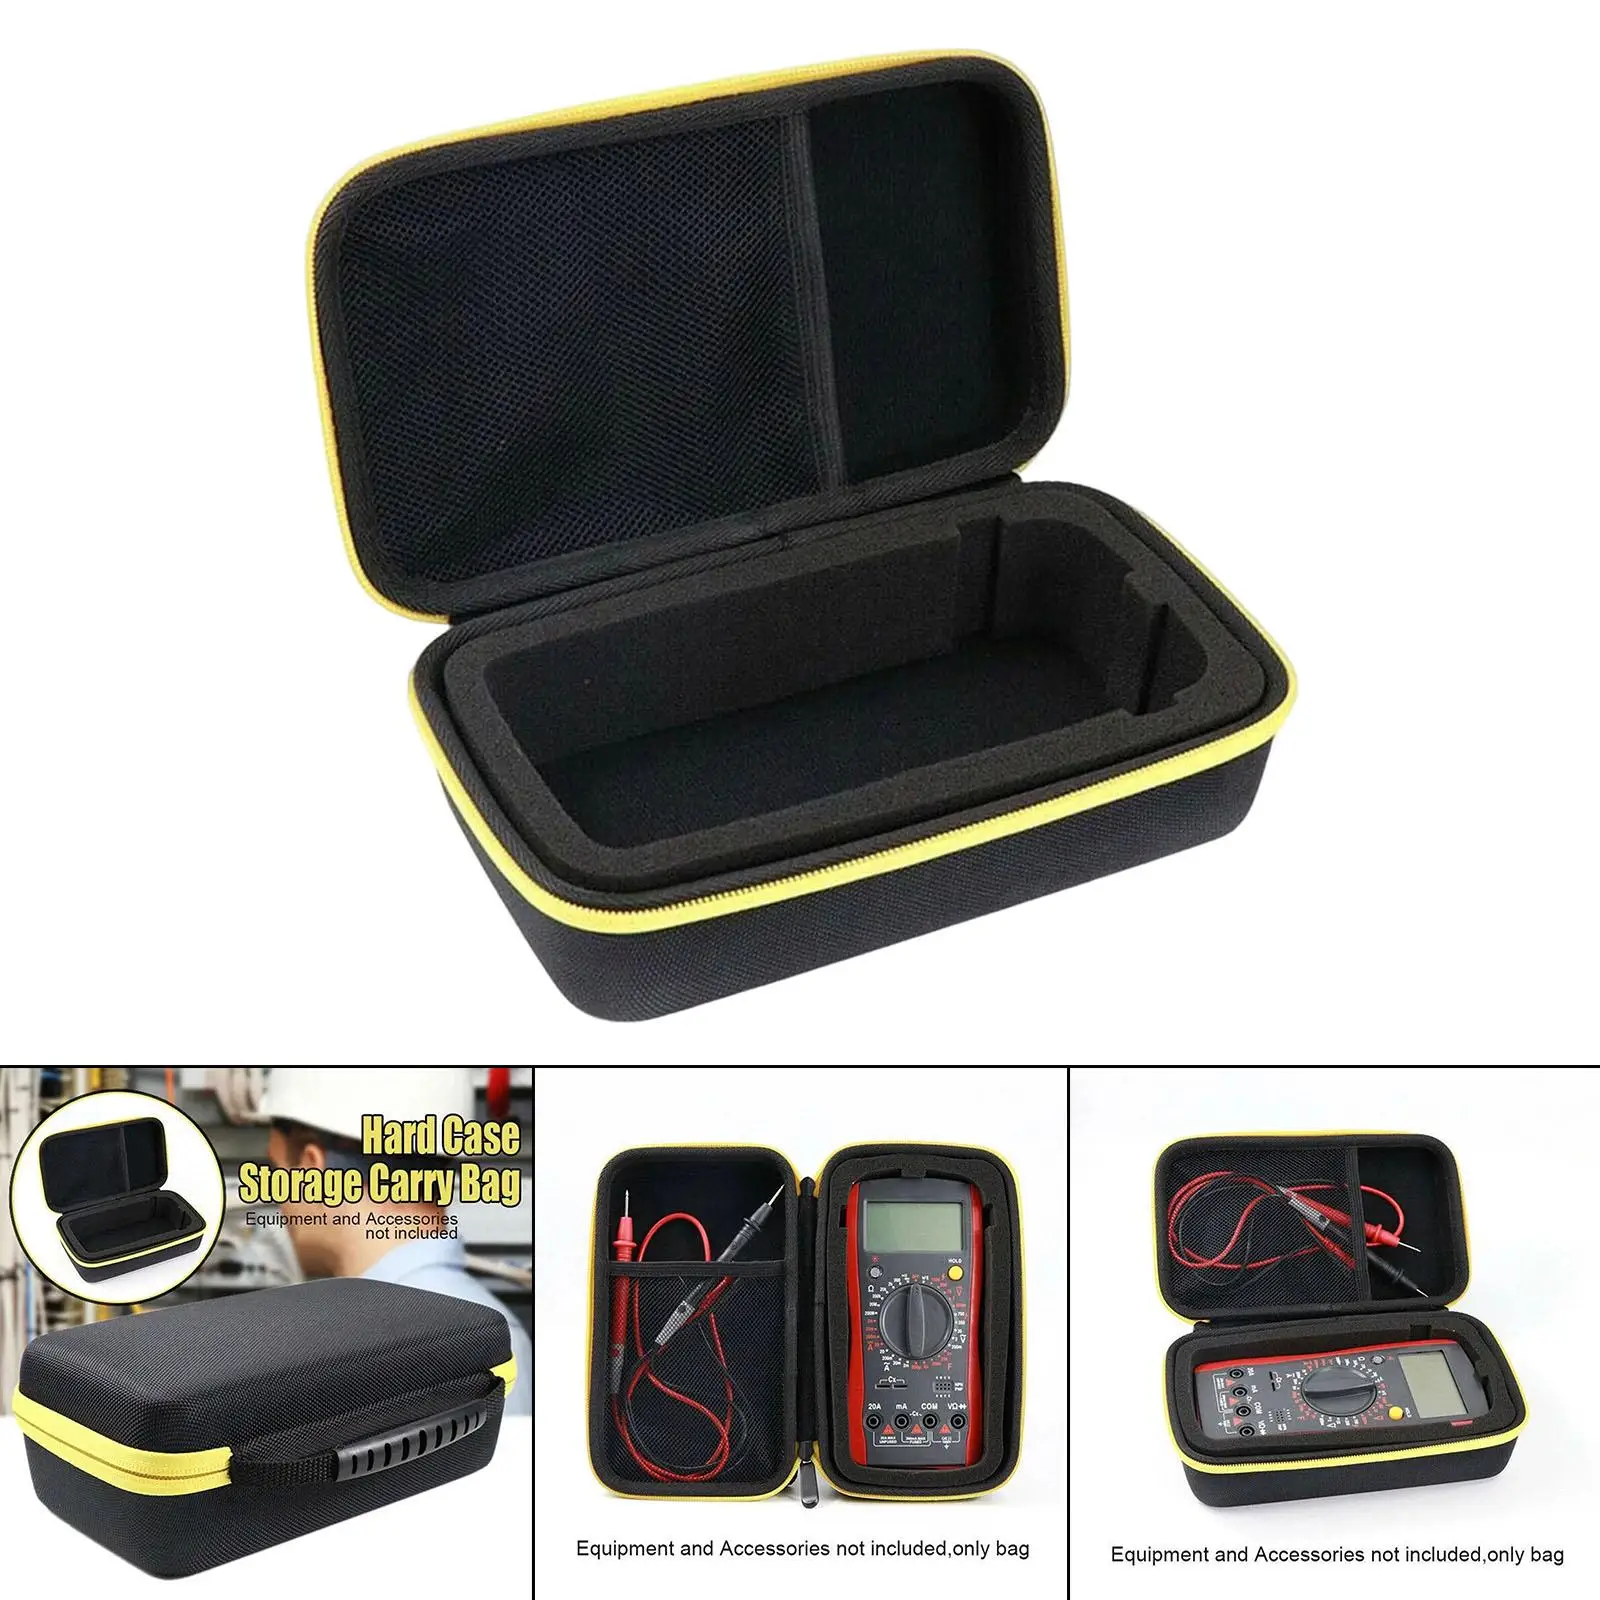 Hard universal meter Meter Soft Case Lightweight with Handle mesh Metal Zipper Portbale Handy Carrying Case for F115C